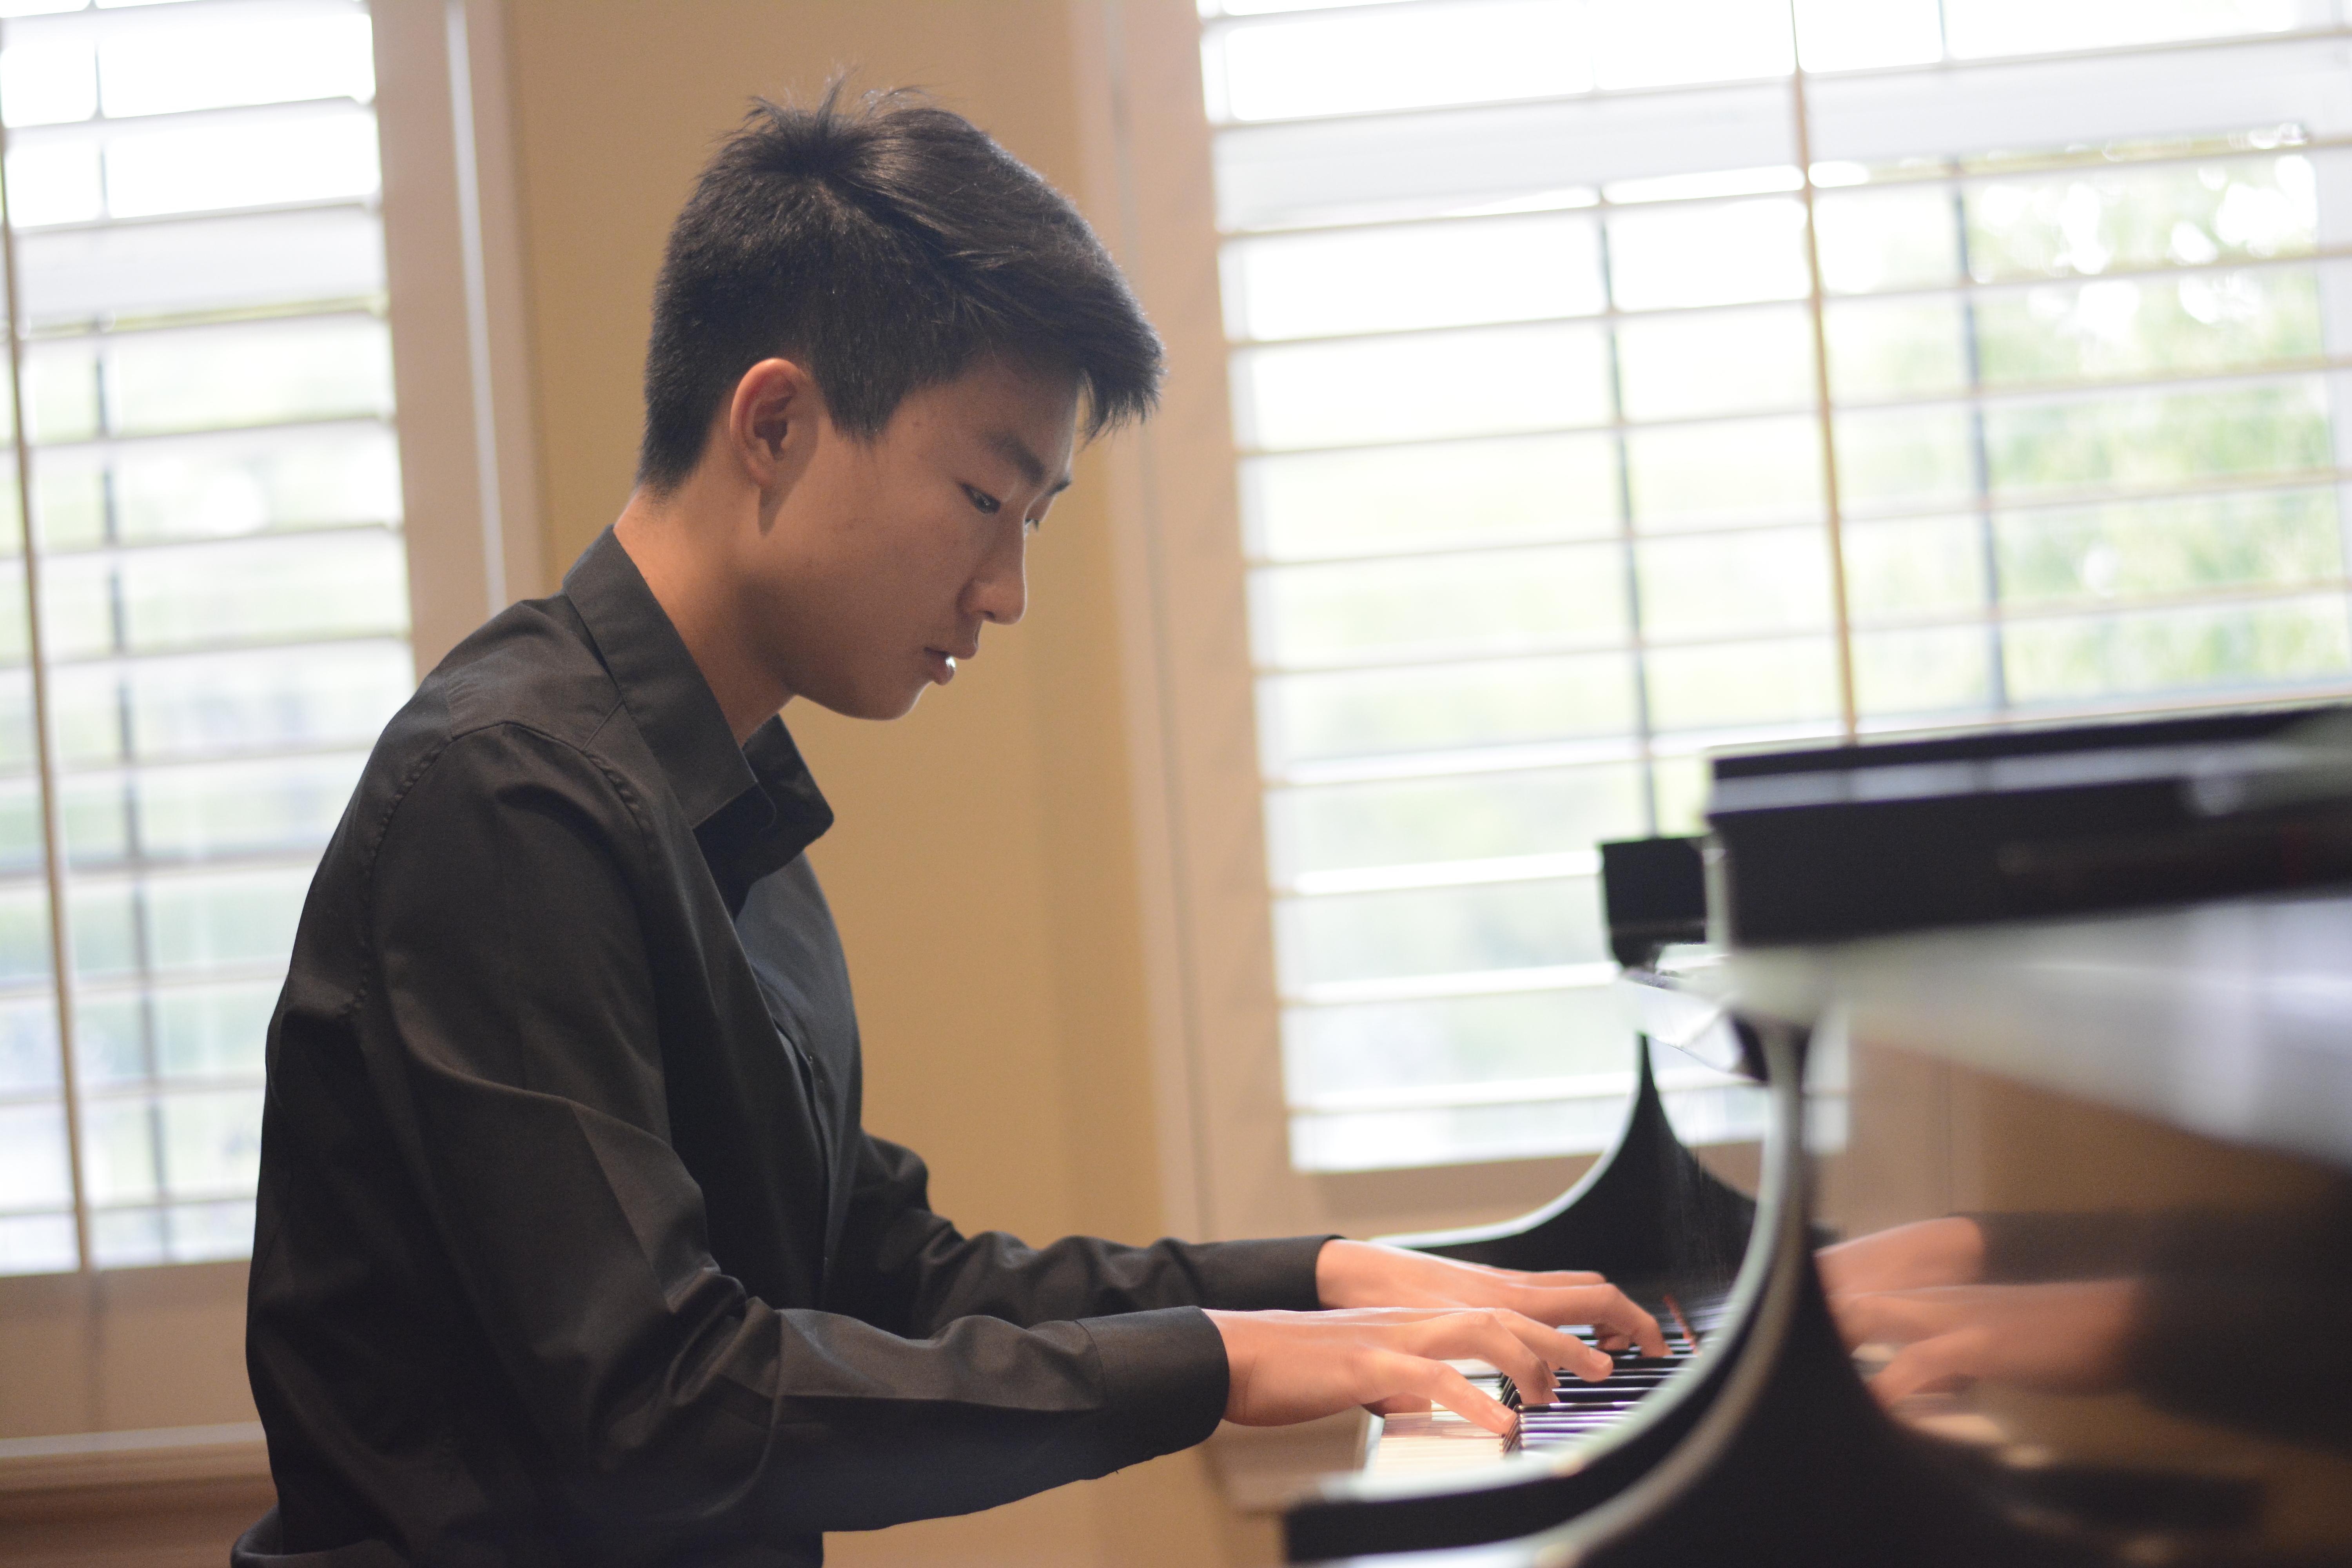 Piano prodigy finds the keys to the future